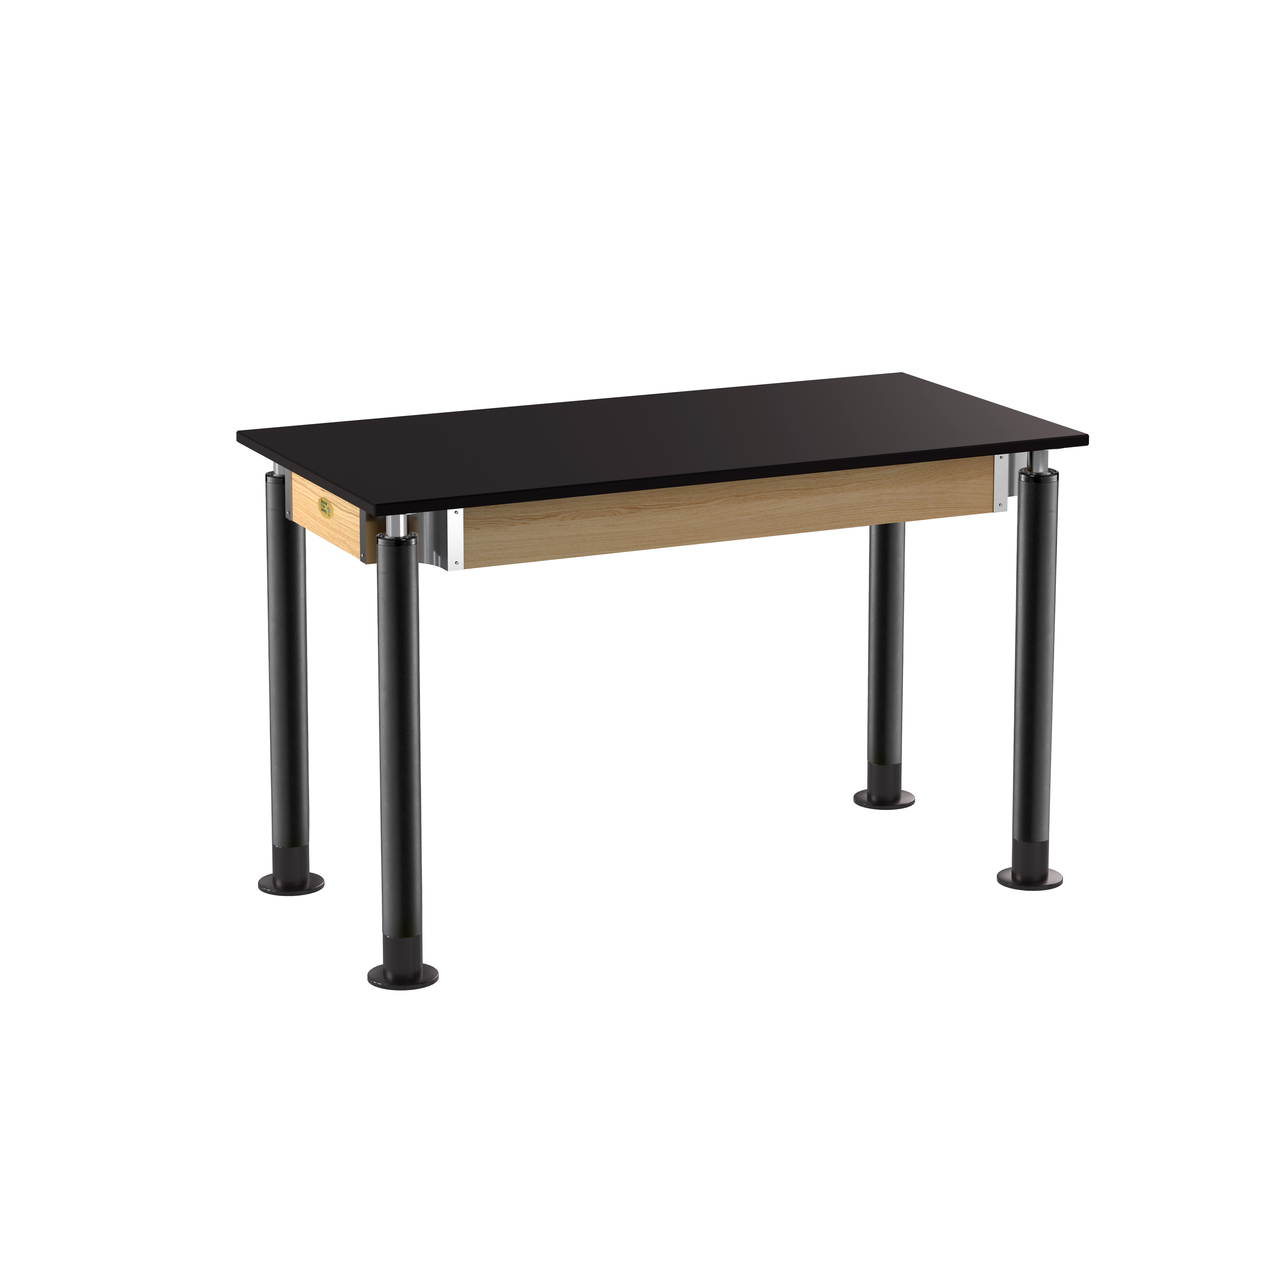 NPS Signature Science Lab Table, Black, 24"x48", Chemical Resistant Top - Black Top and Black Leg